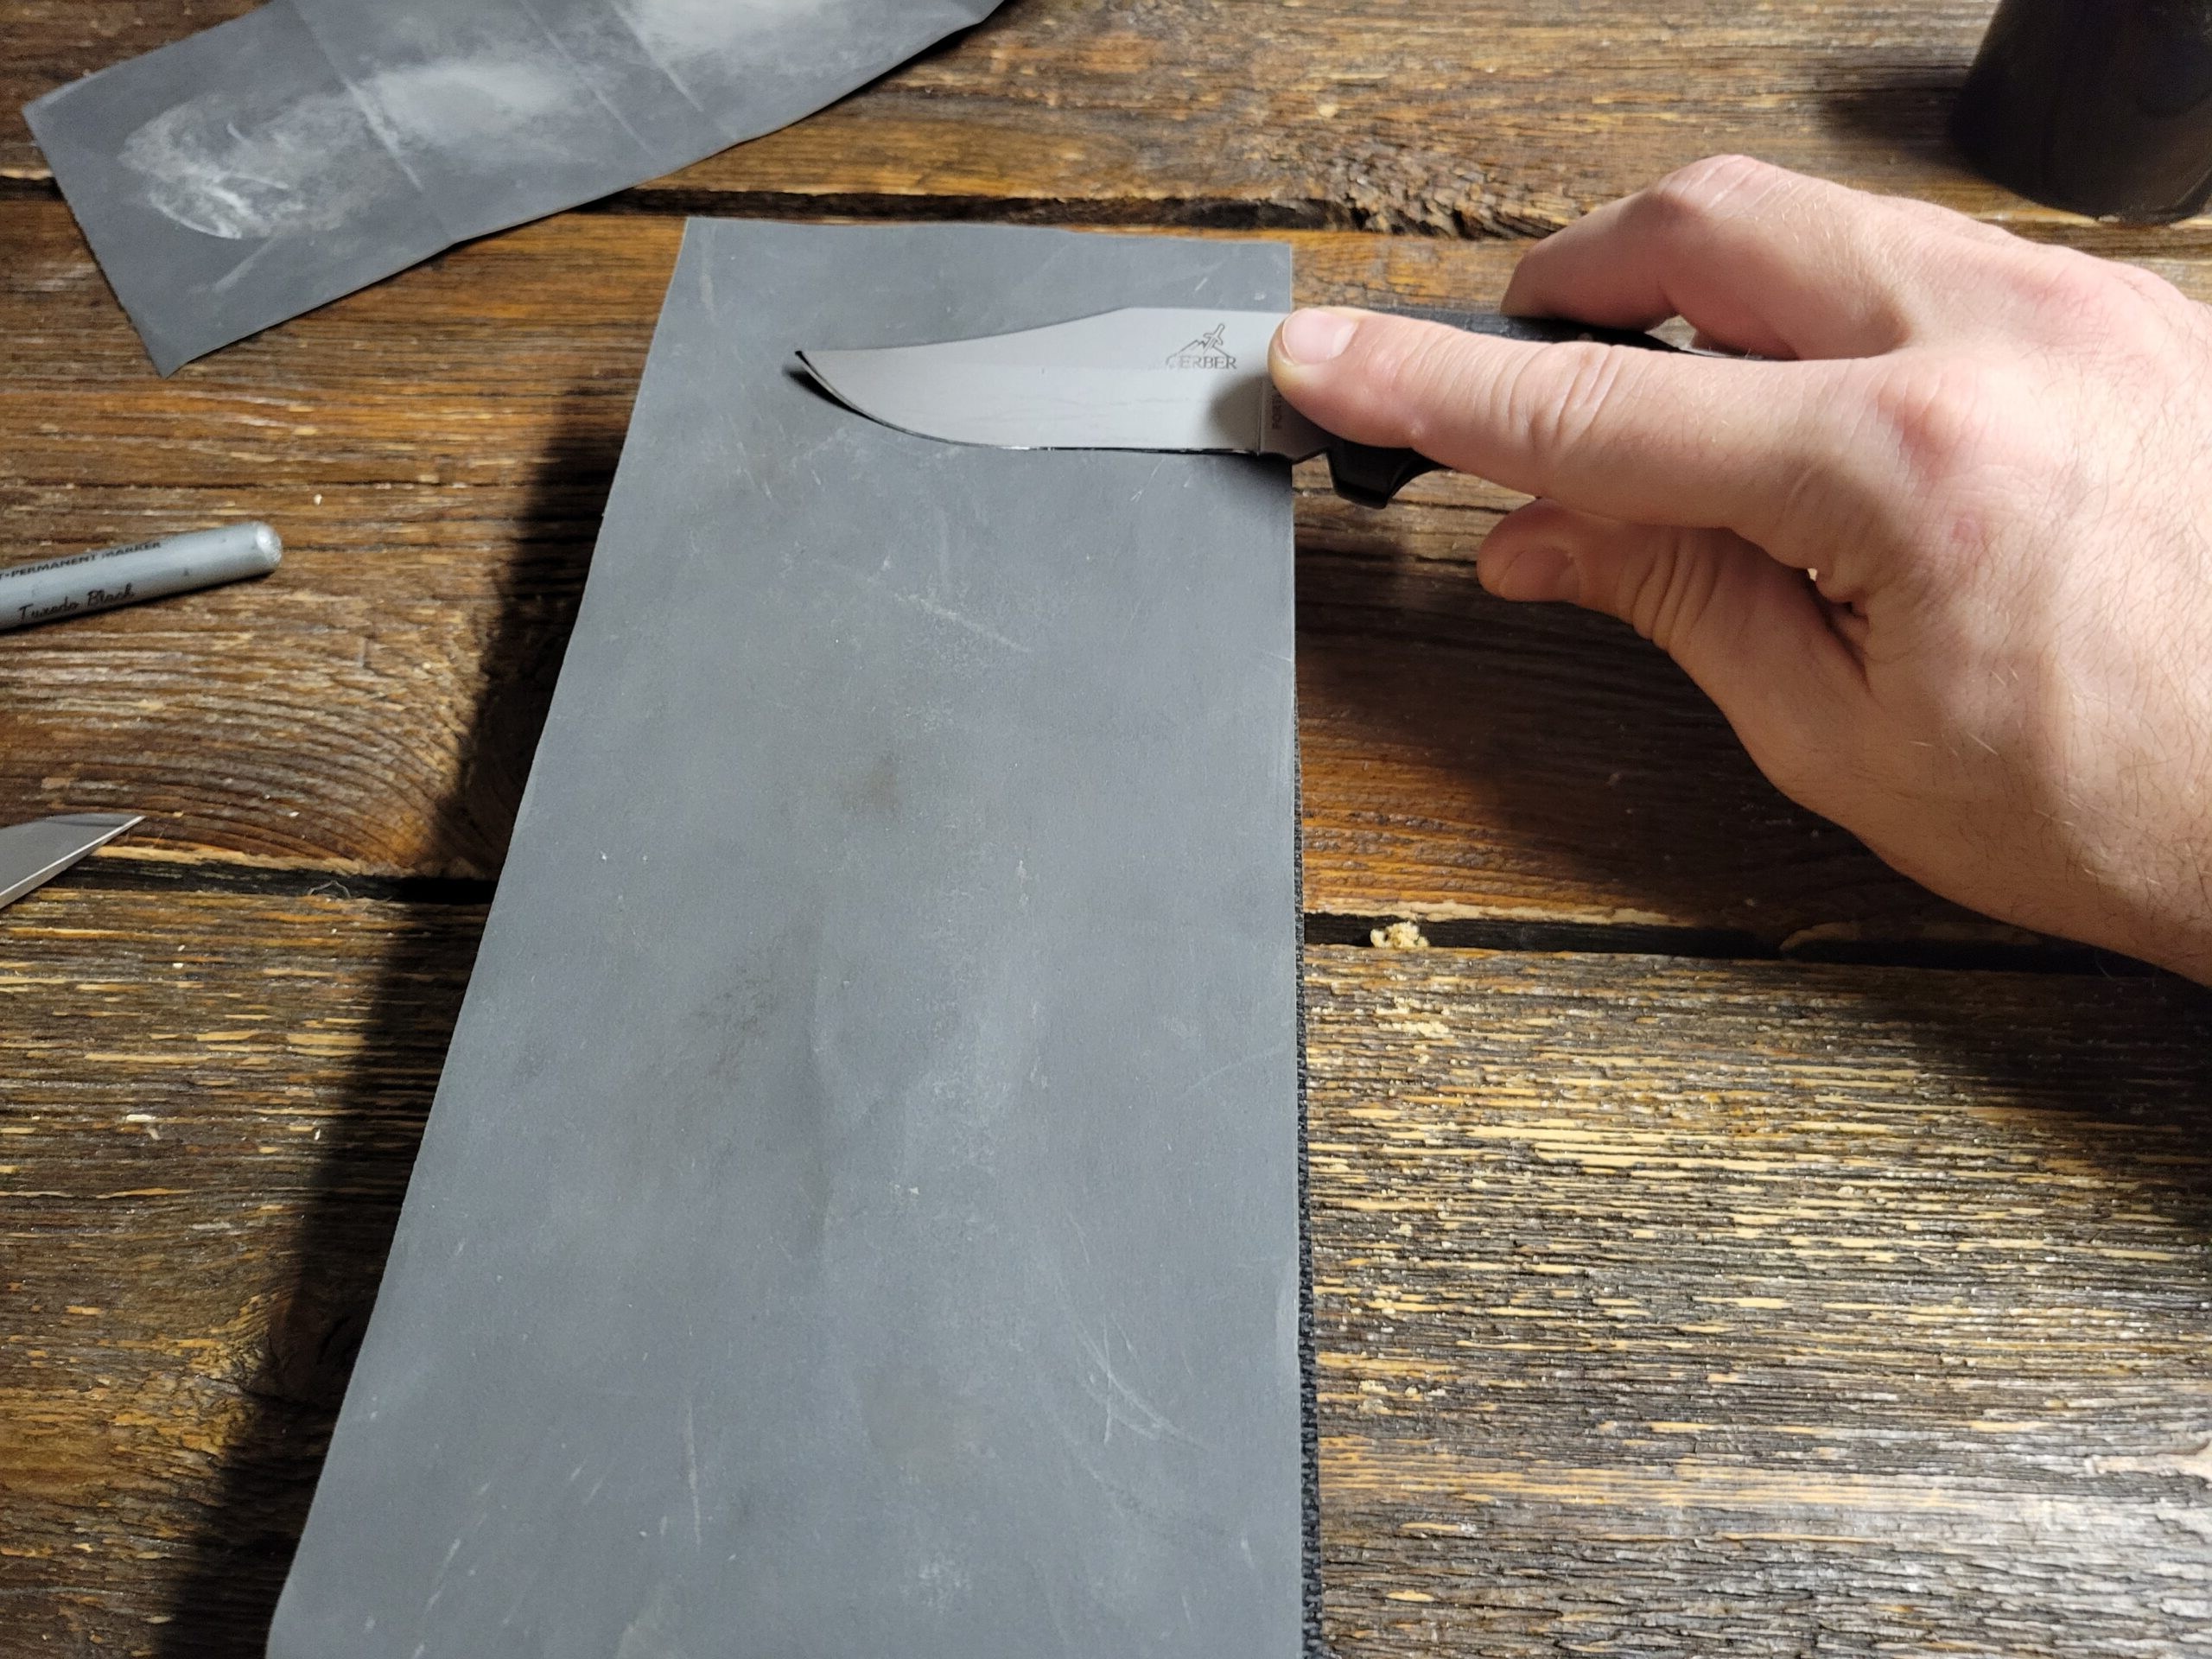 Find your angle when sharpening a knife